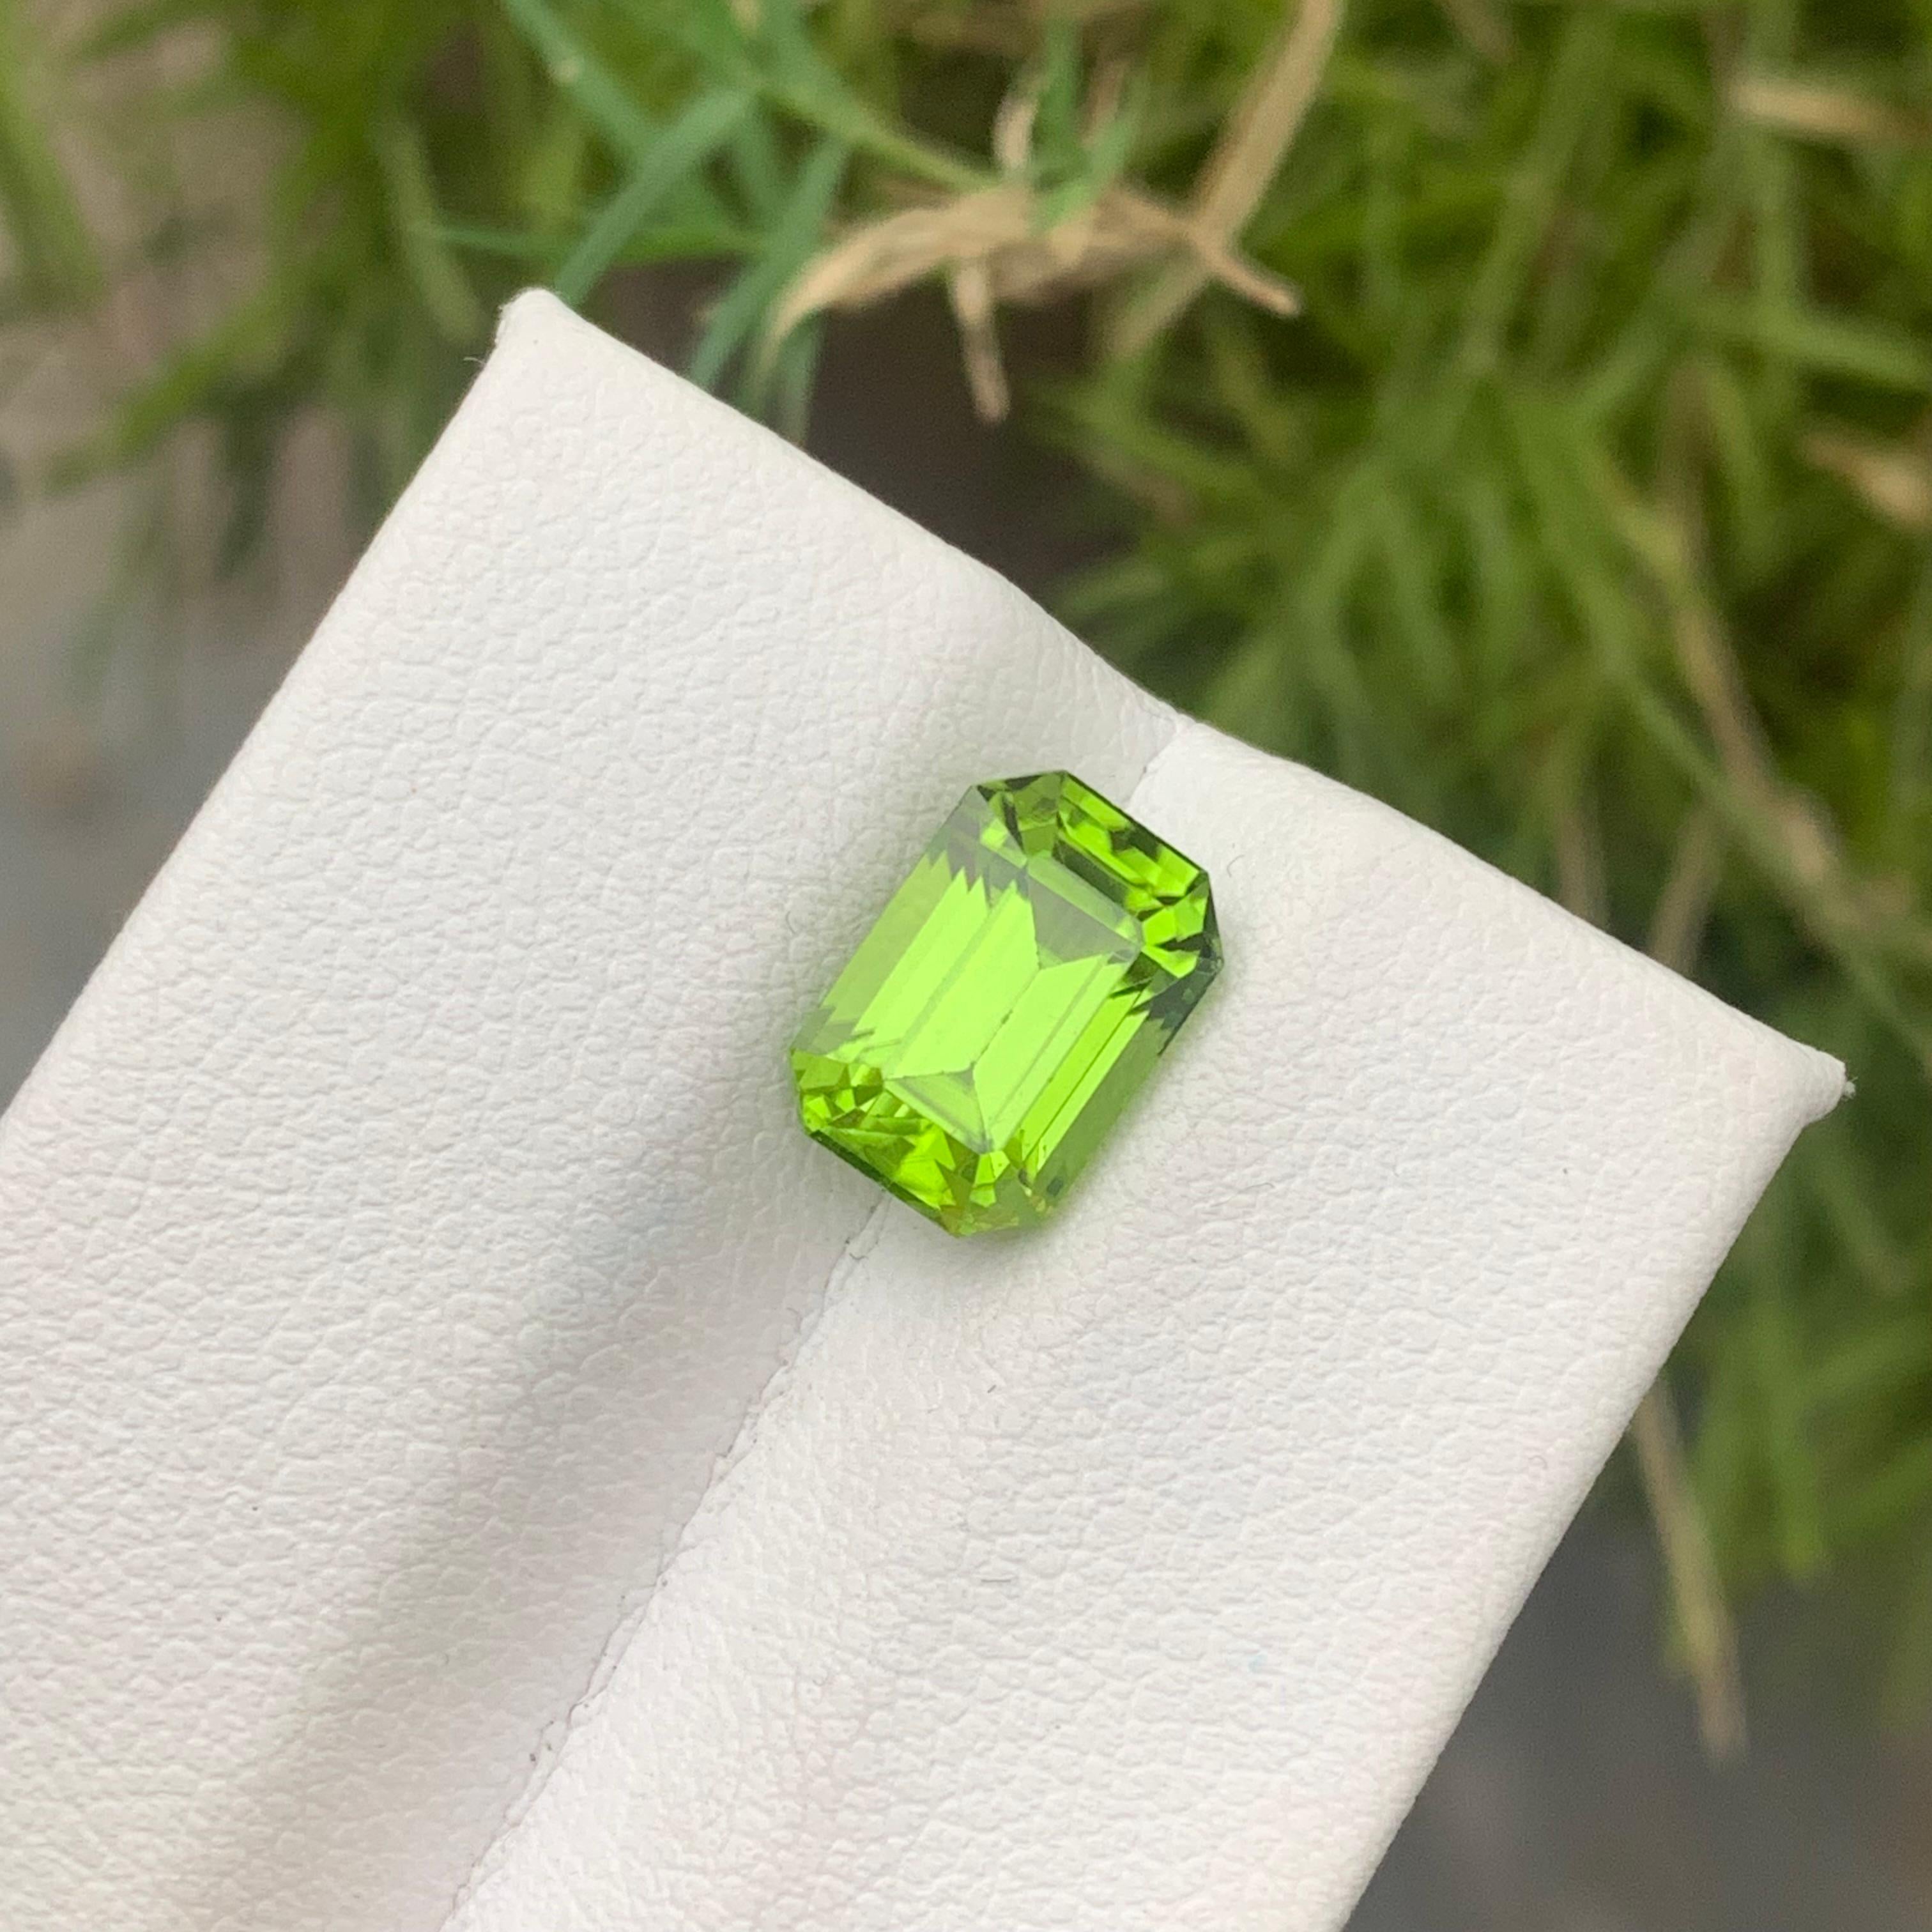 Gorgeous 3.35 Carat Natural Loose Green Peridot Gemstone from Pakistani Mine For Sale 2